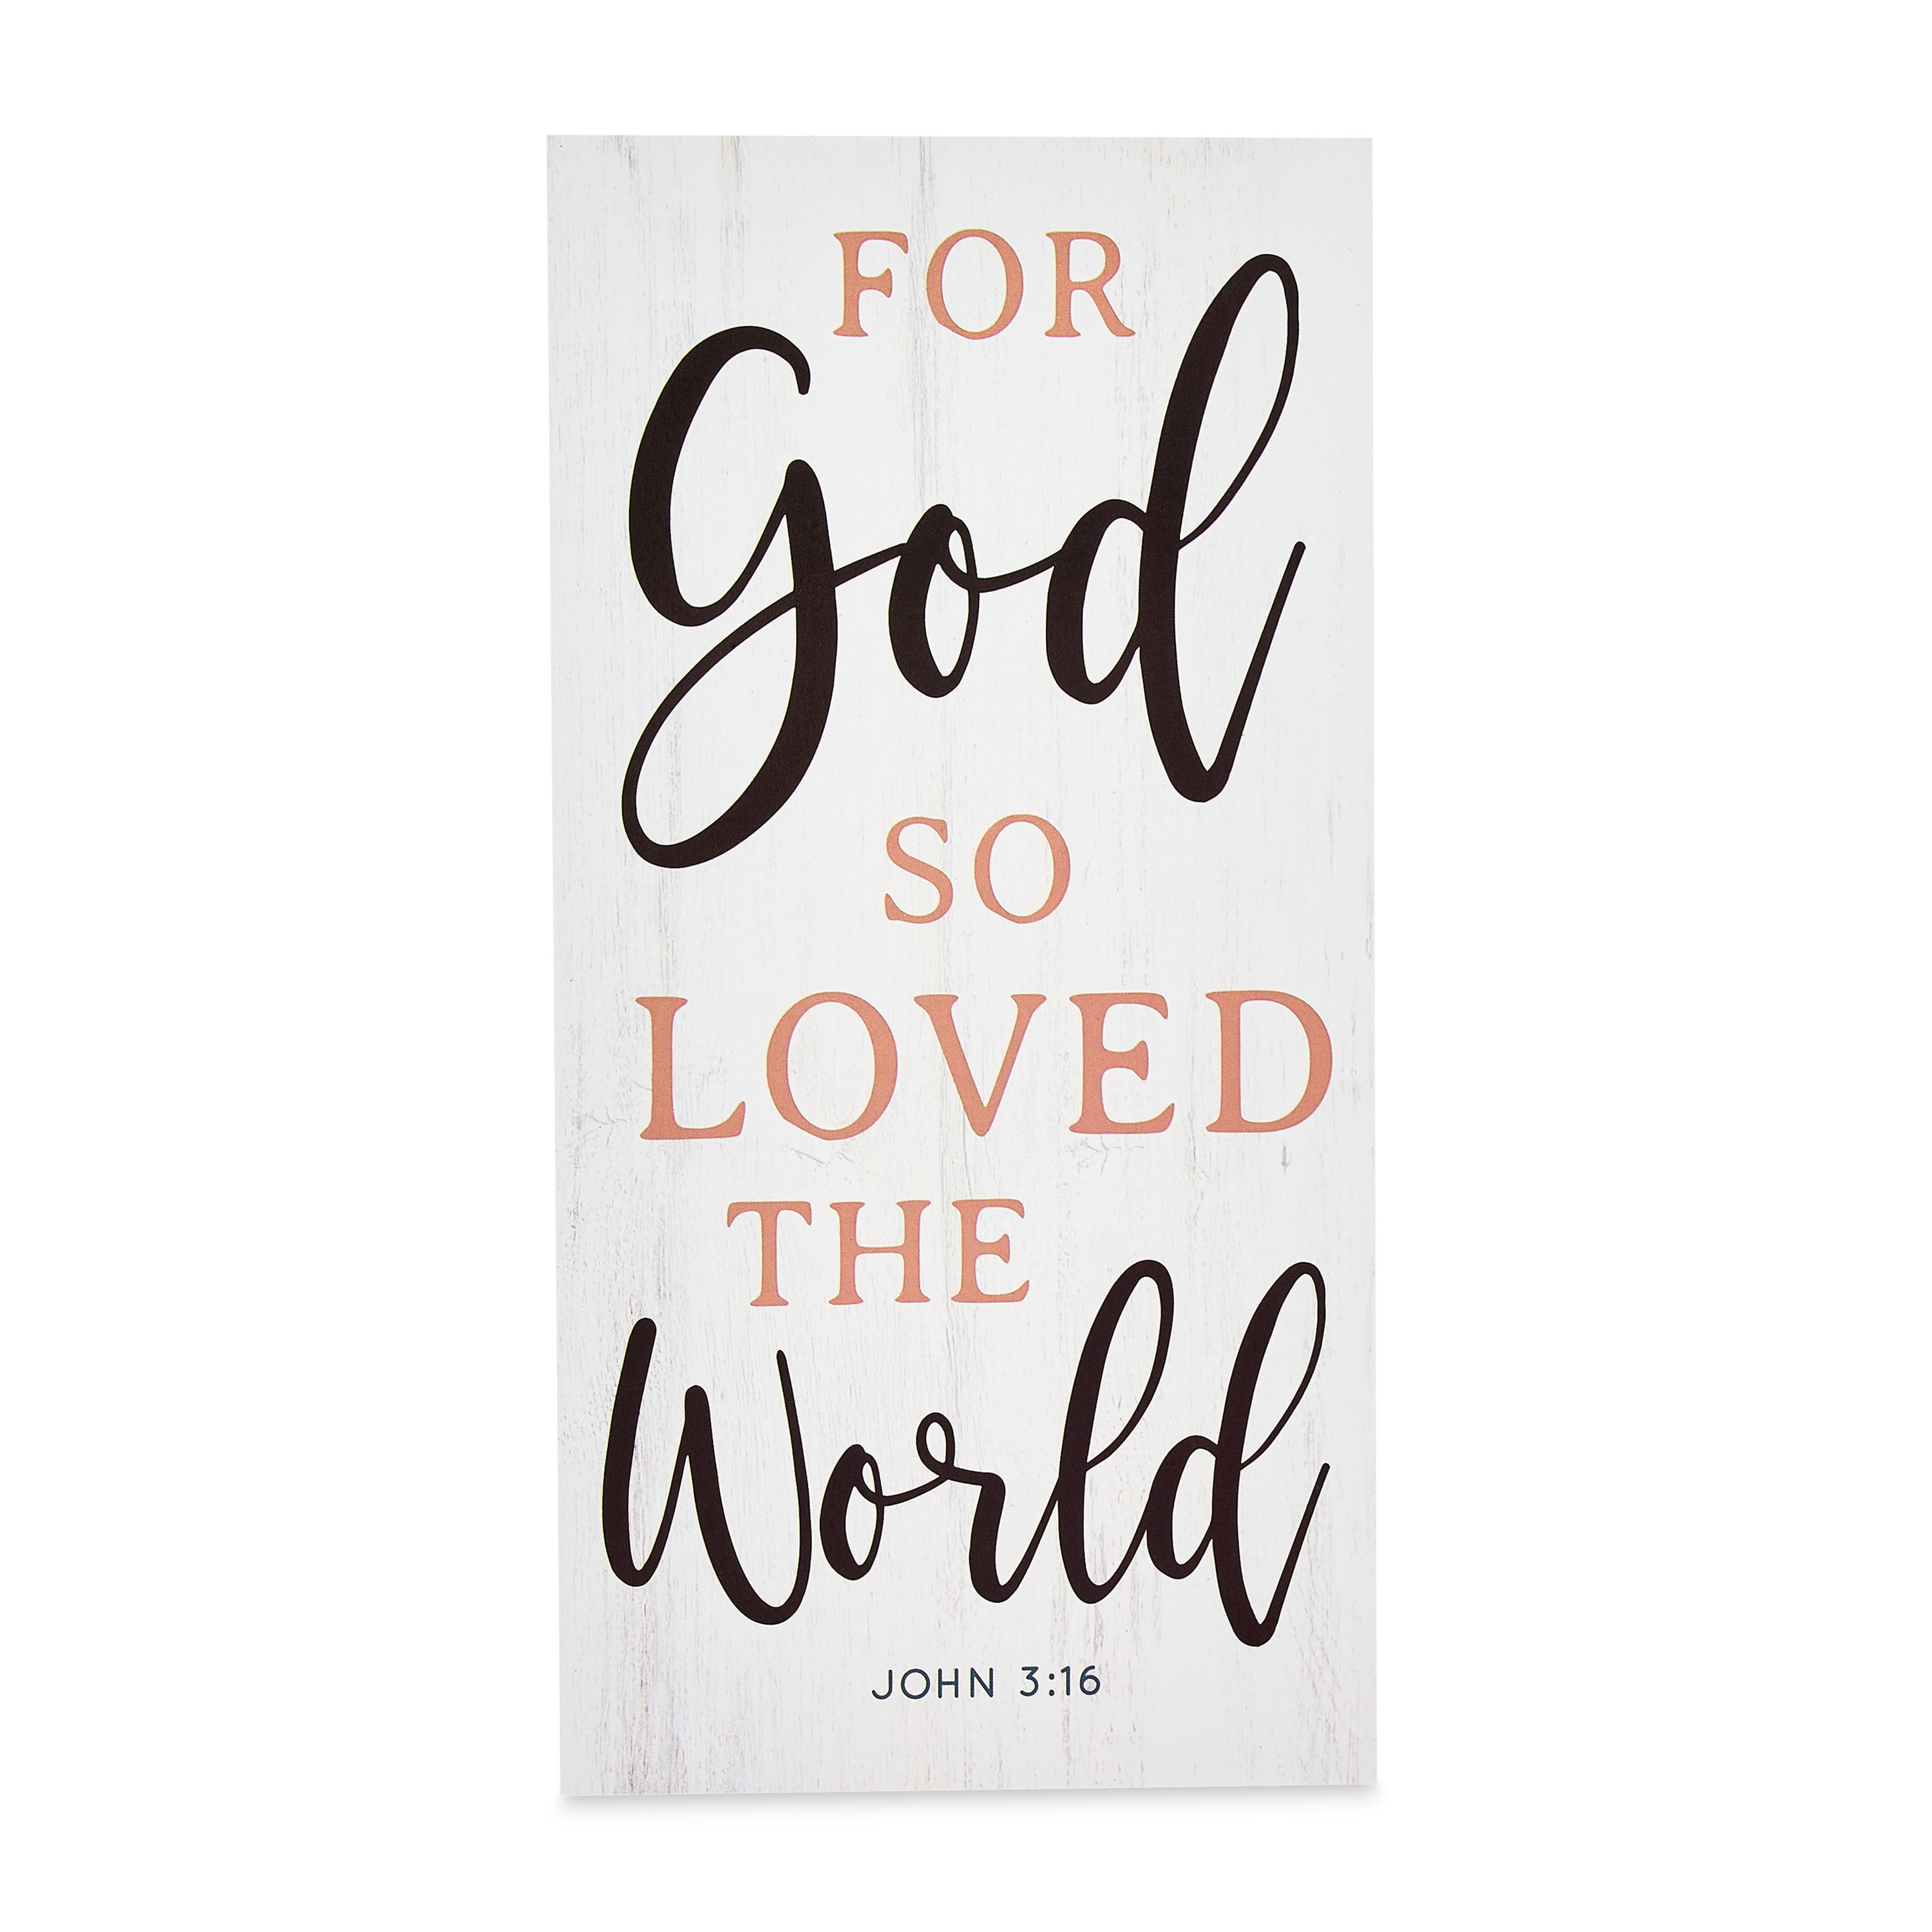 Way To Celebrate Easter God So Loved the World Box Sign, 5" x 10"